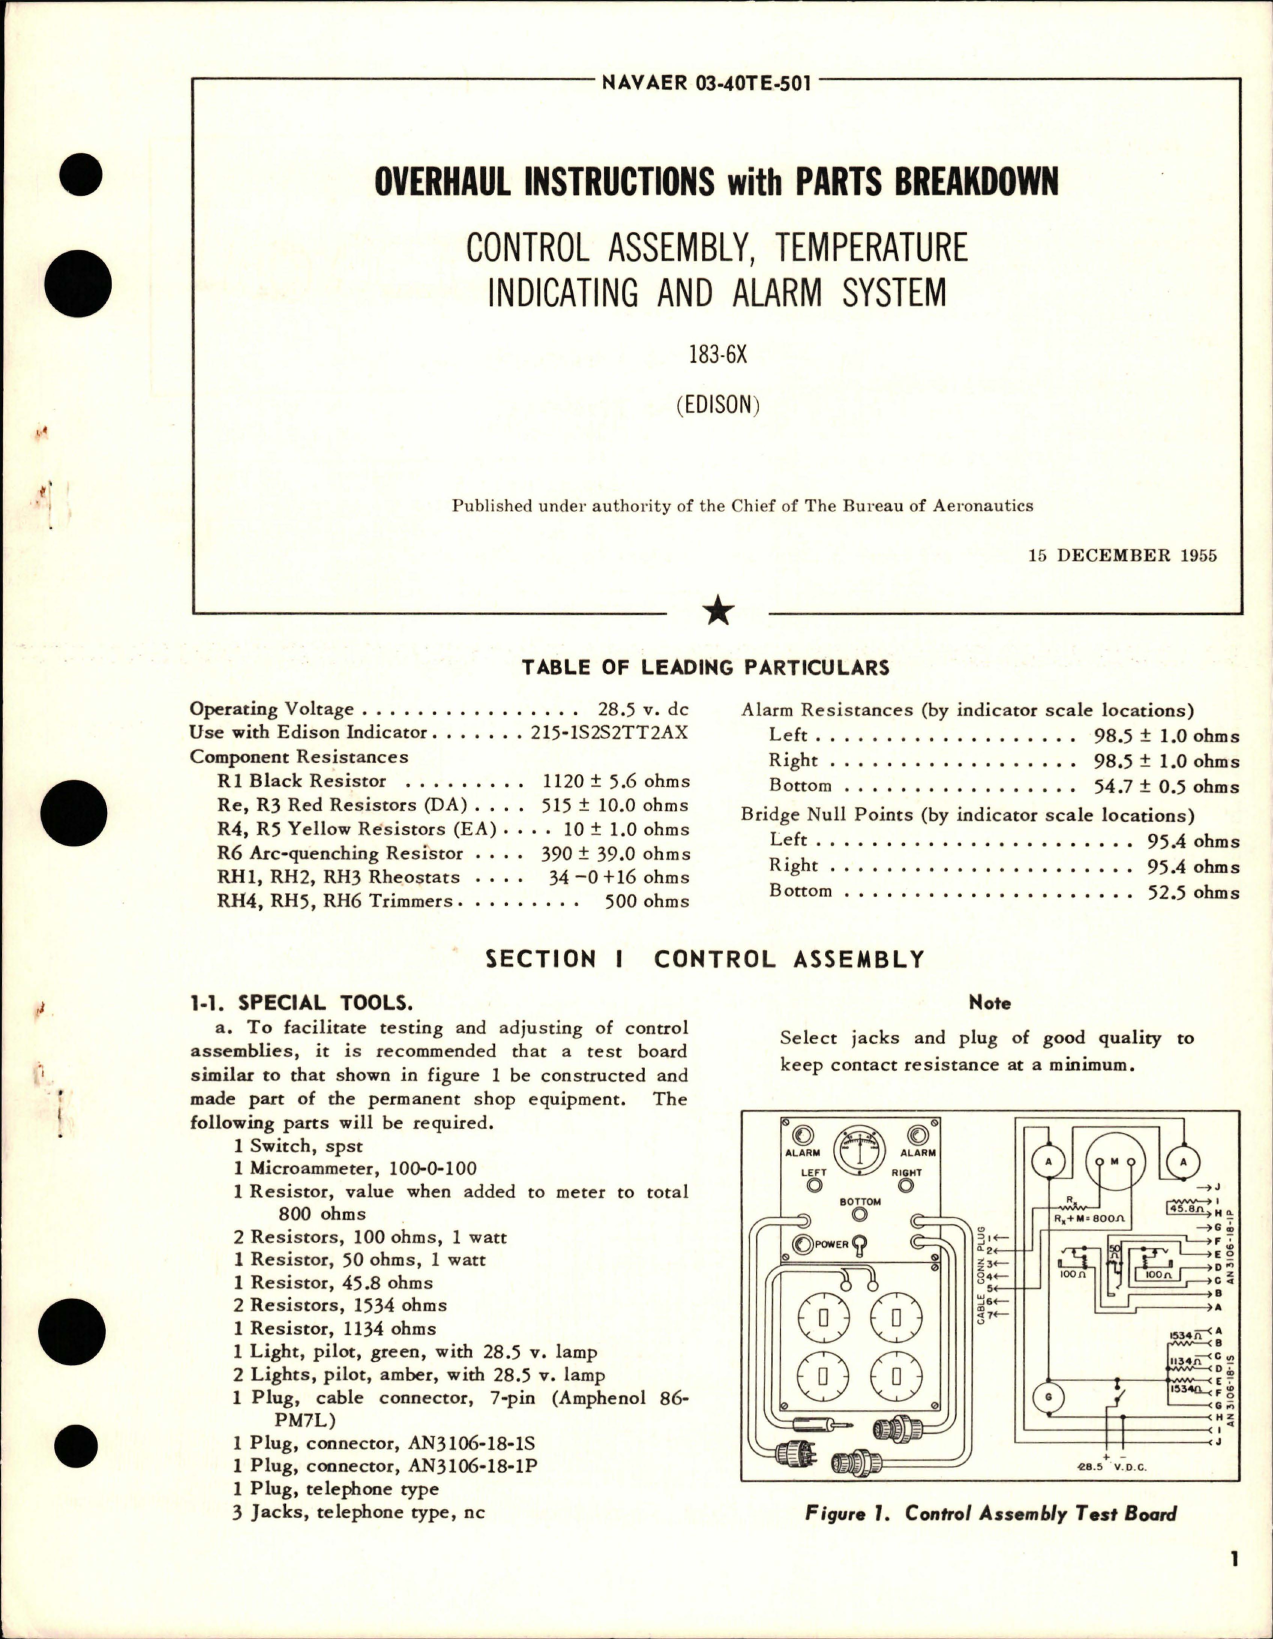 Sample page 1 from AirCorps Library document: Overhaul Instructions with Parts Breakdown for Temperature Indicating & Alarm System Control Assembly - 183-6X 